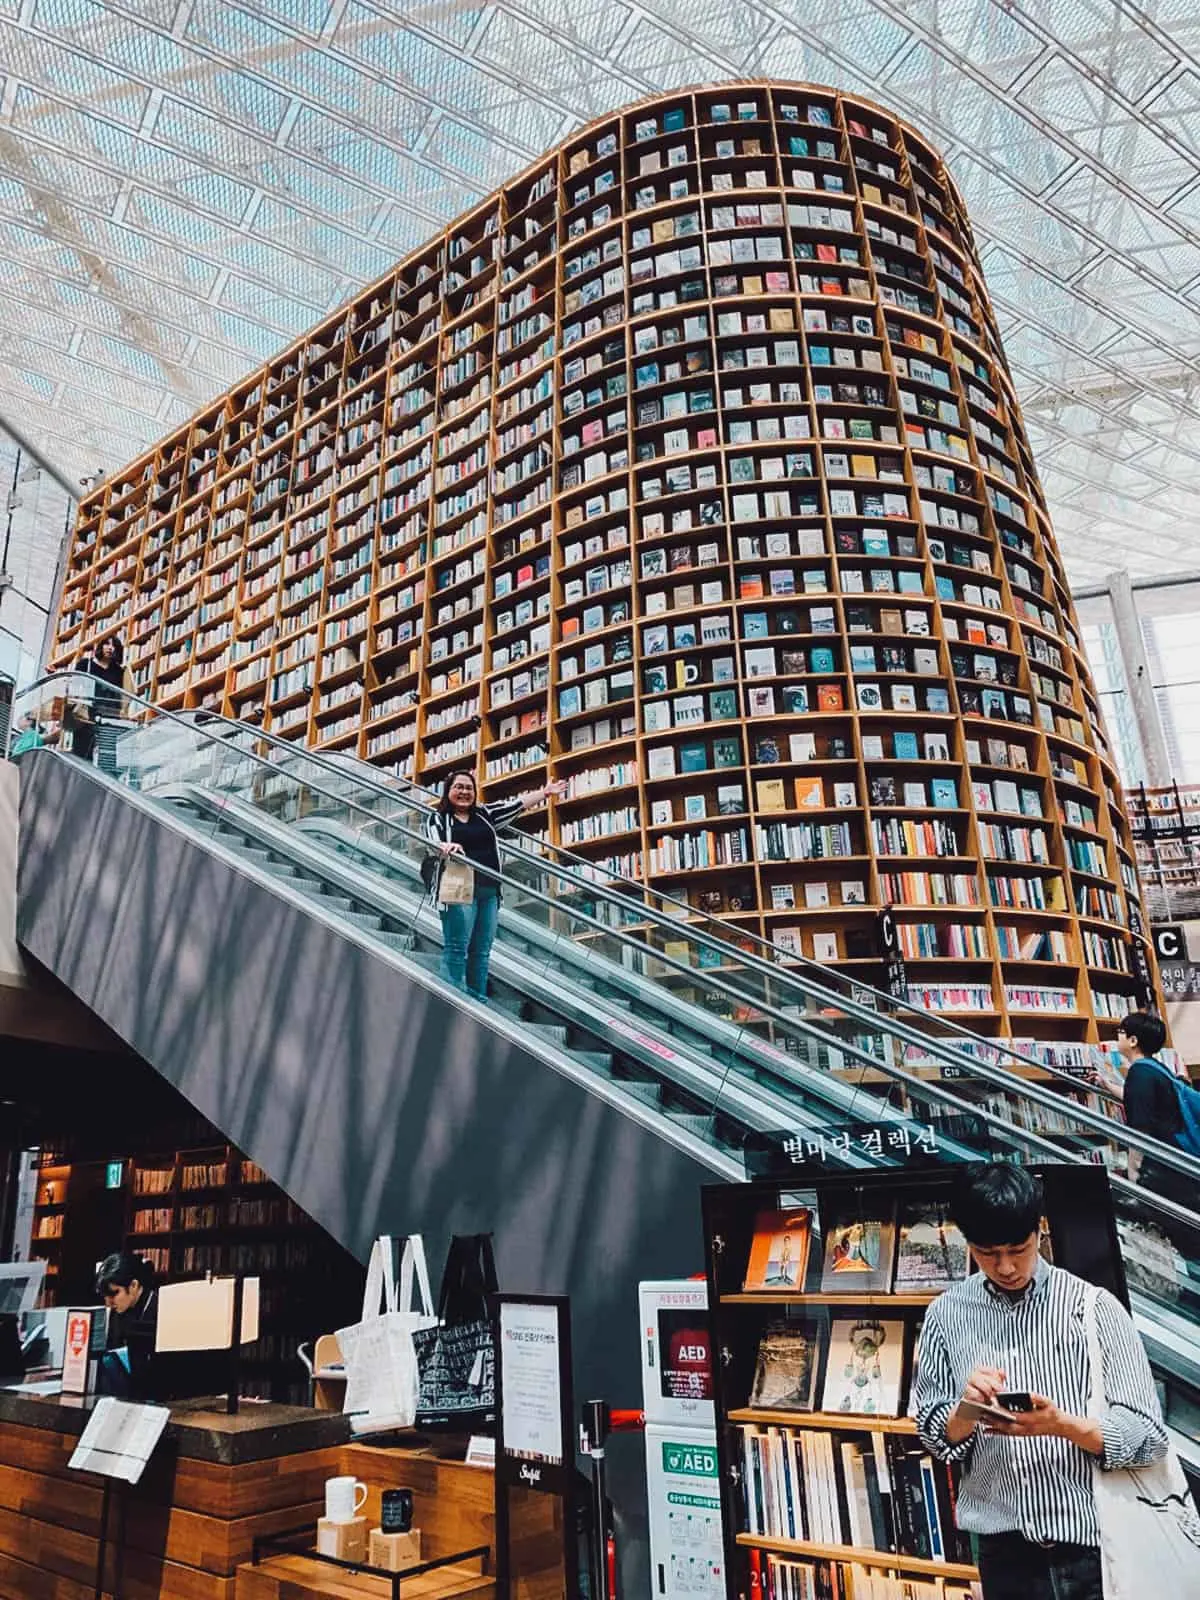 Starfield Library in COEX Mall